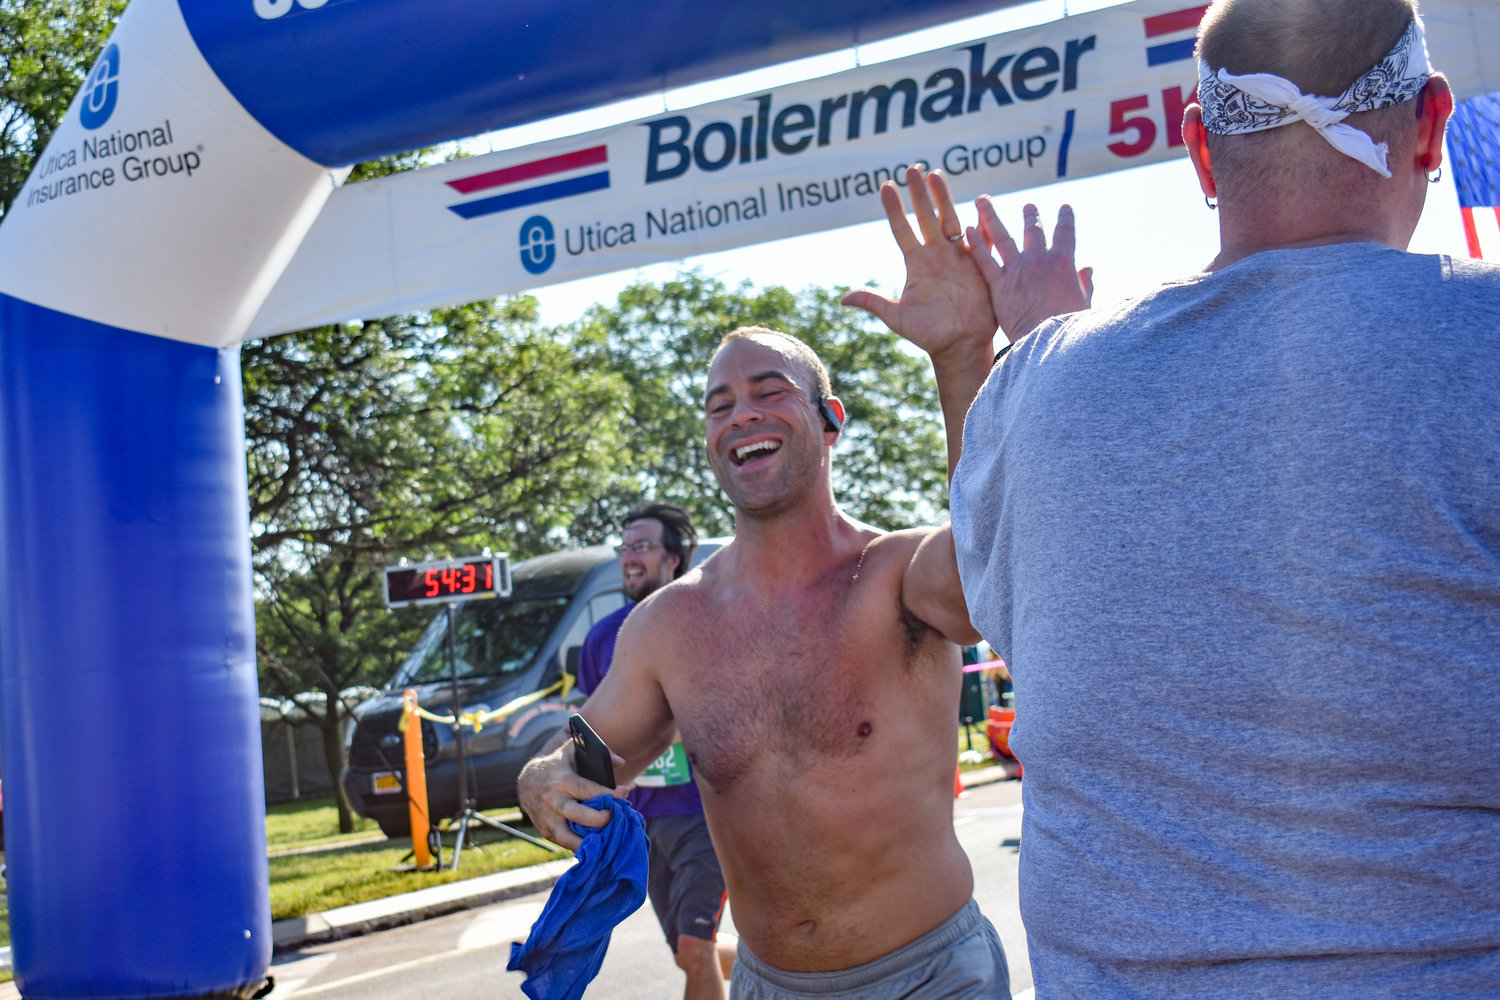 Runners in the 45th Boilermaker Road Race celebrated making it two-thirds of the way after passing the 5K starting line.